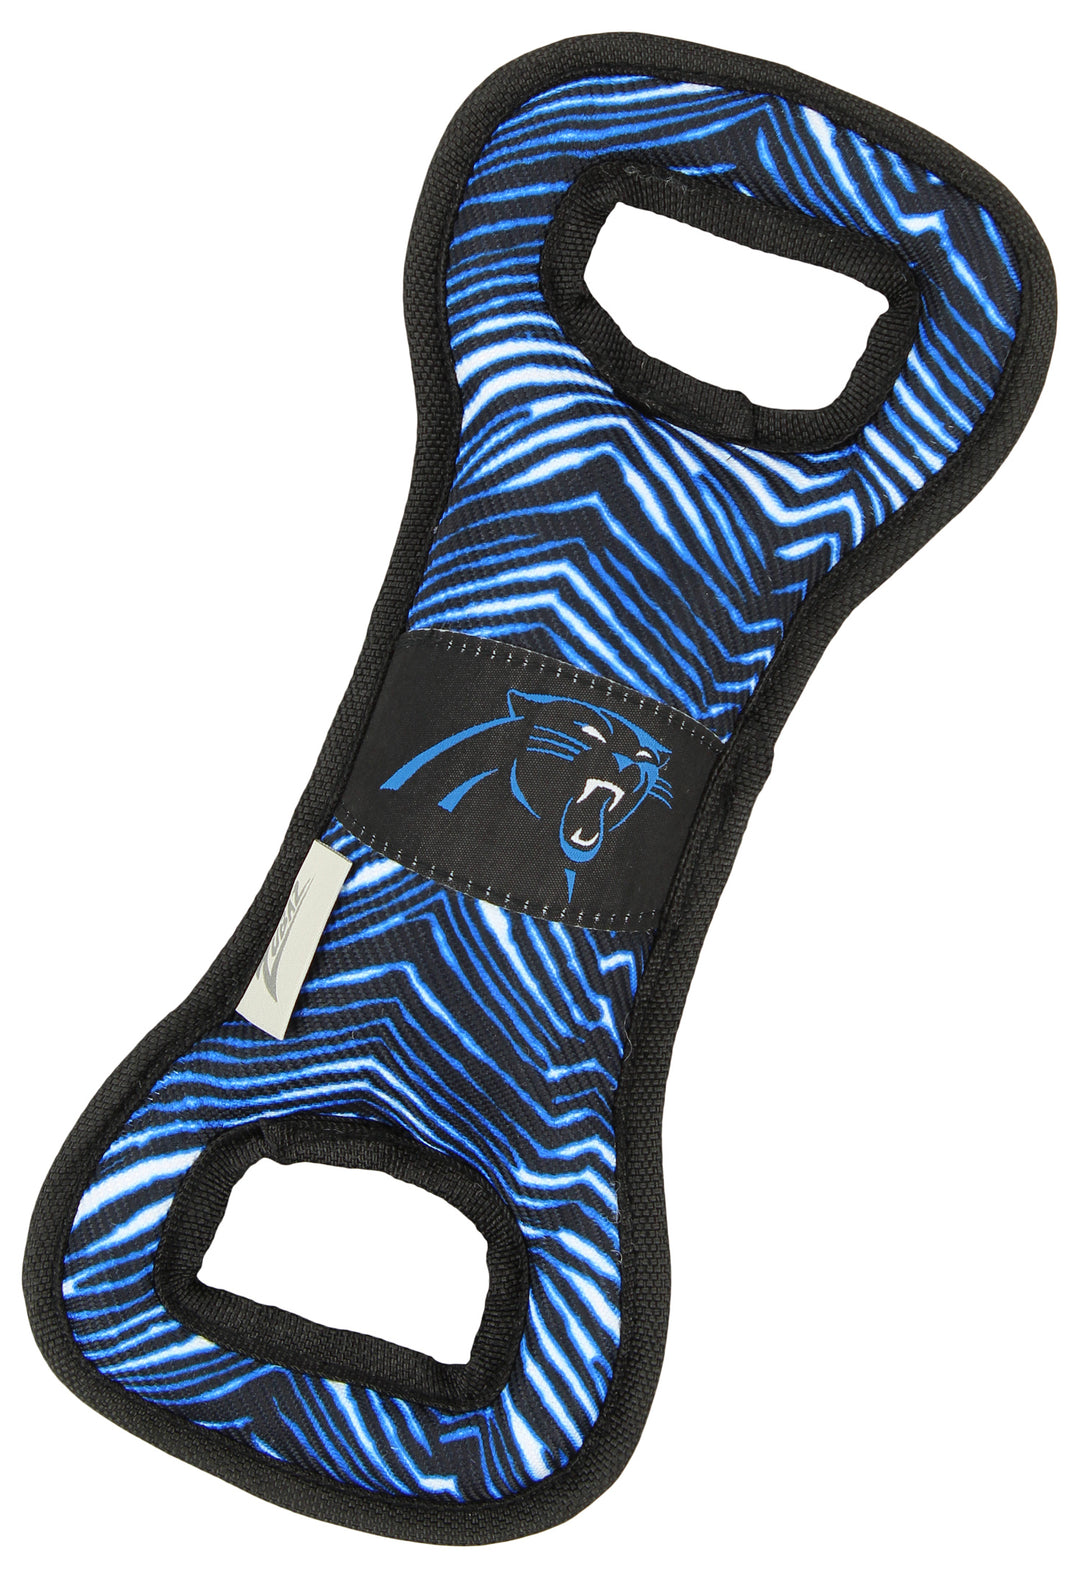 Zubaz X Pets First NFL Carolina Panthers Team Logo Dog Tug Toy with Squeaker